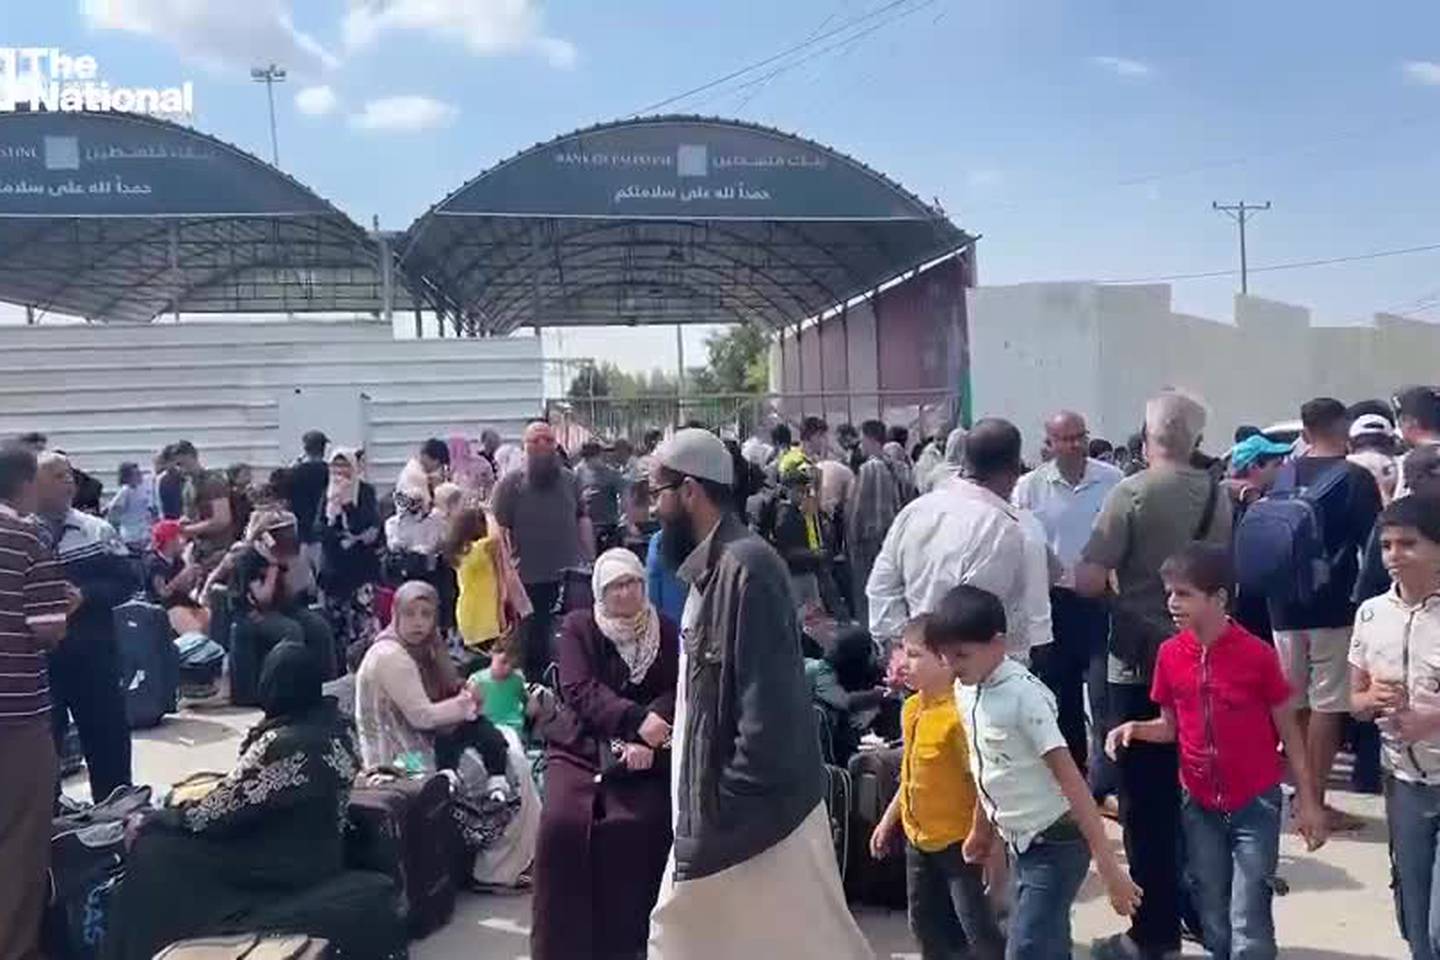 Thousands of people waiting for the Rafah crossing to open